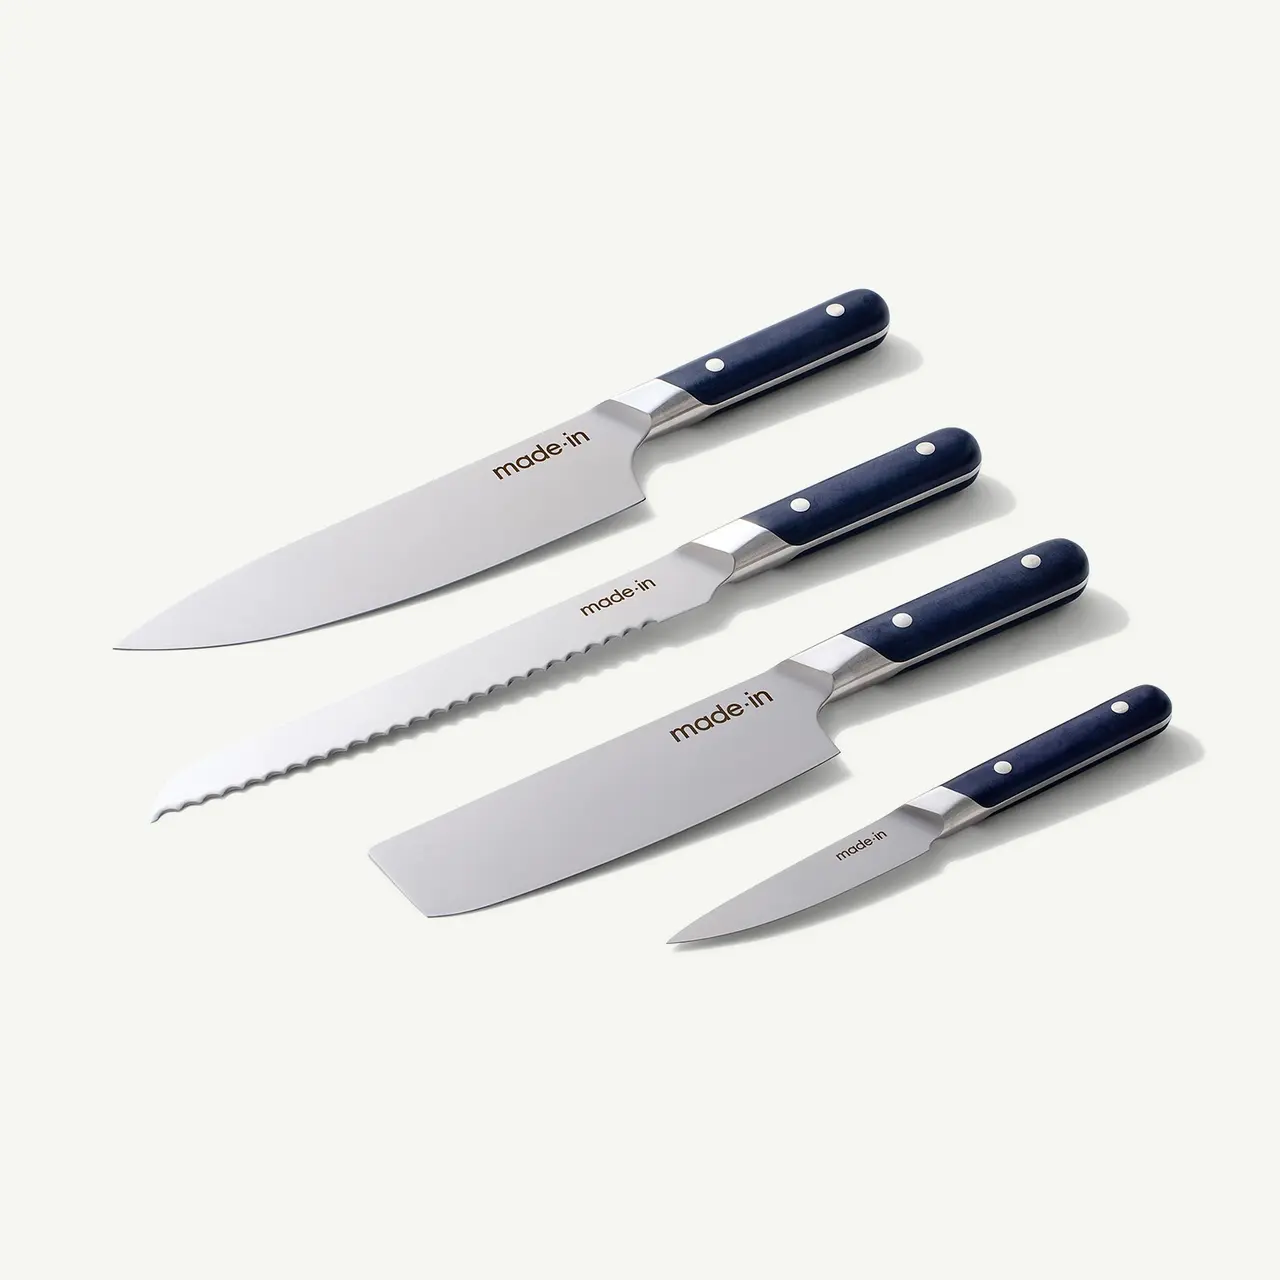 Five assorted kitchen knives with navy blue handles are neatly arranged on a light background.